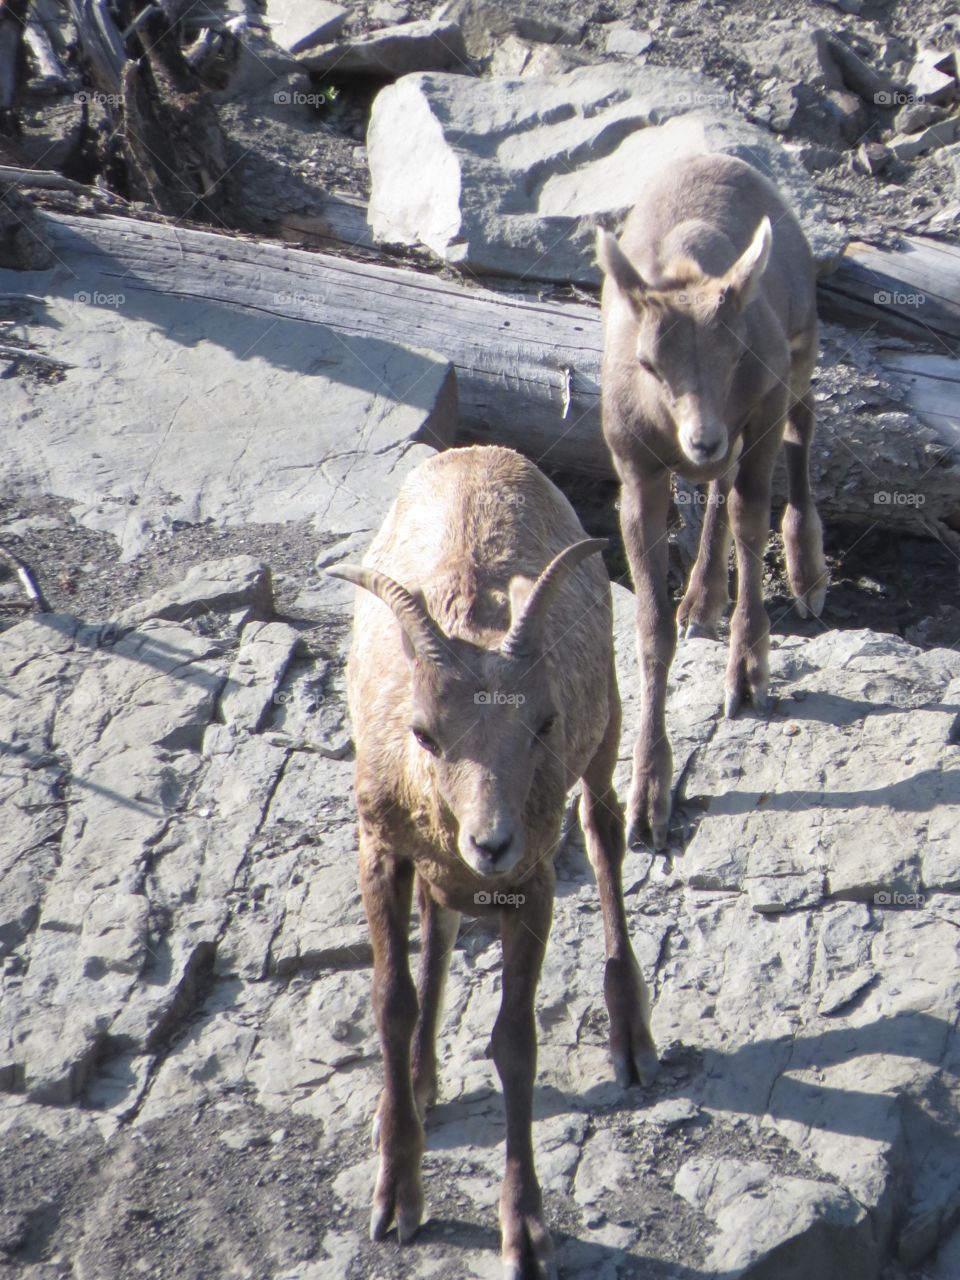 Two, baby mountain goats